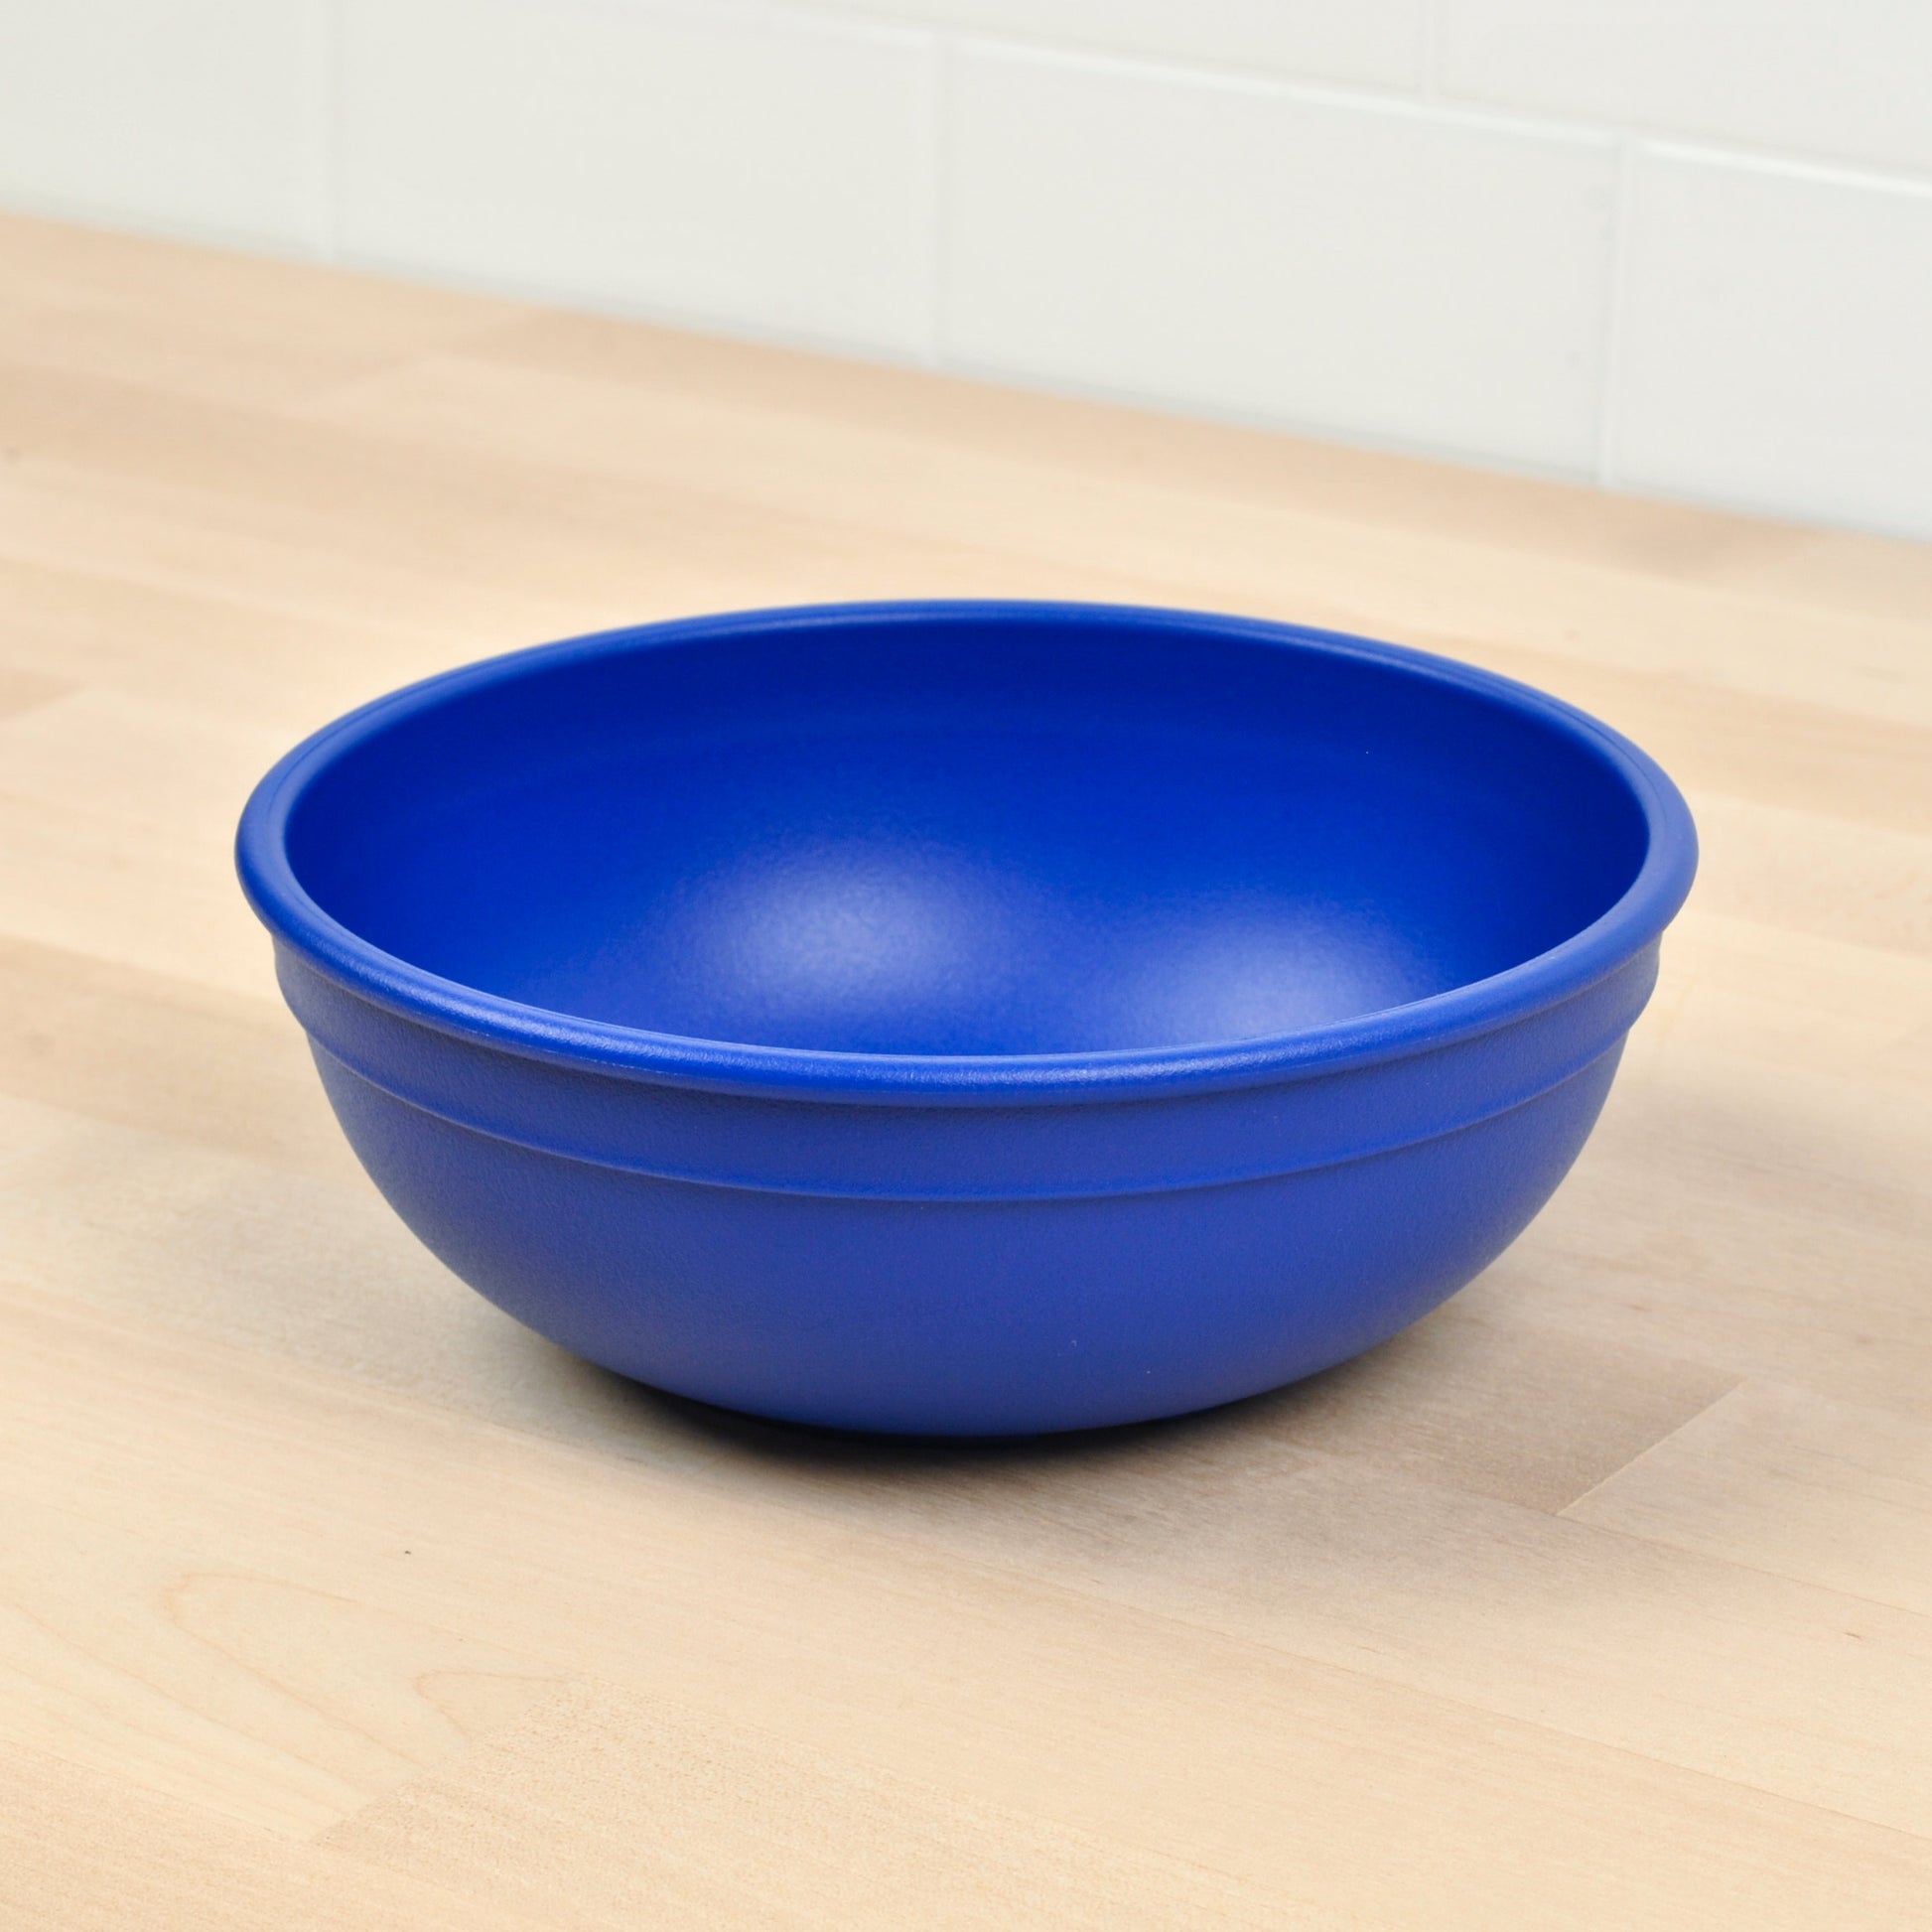 Re-Play Bowl | Navy Blue Large Size from Bear & Moo